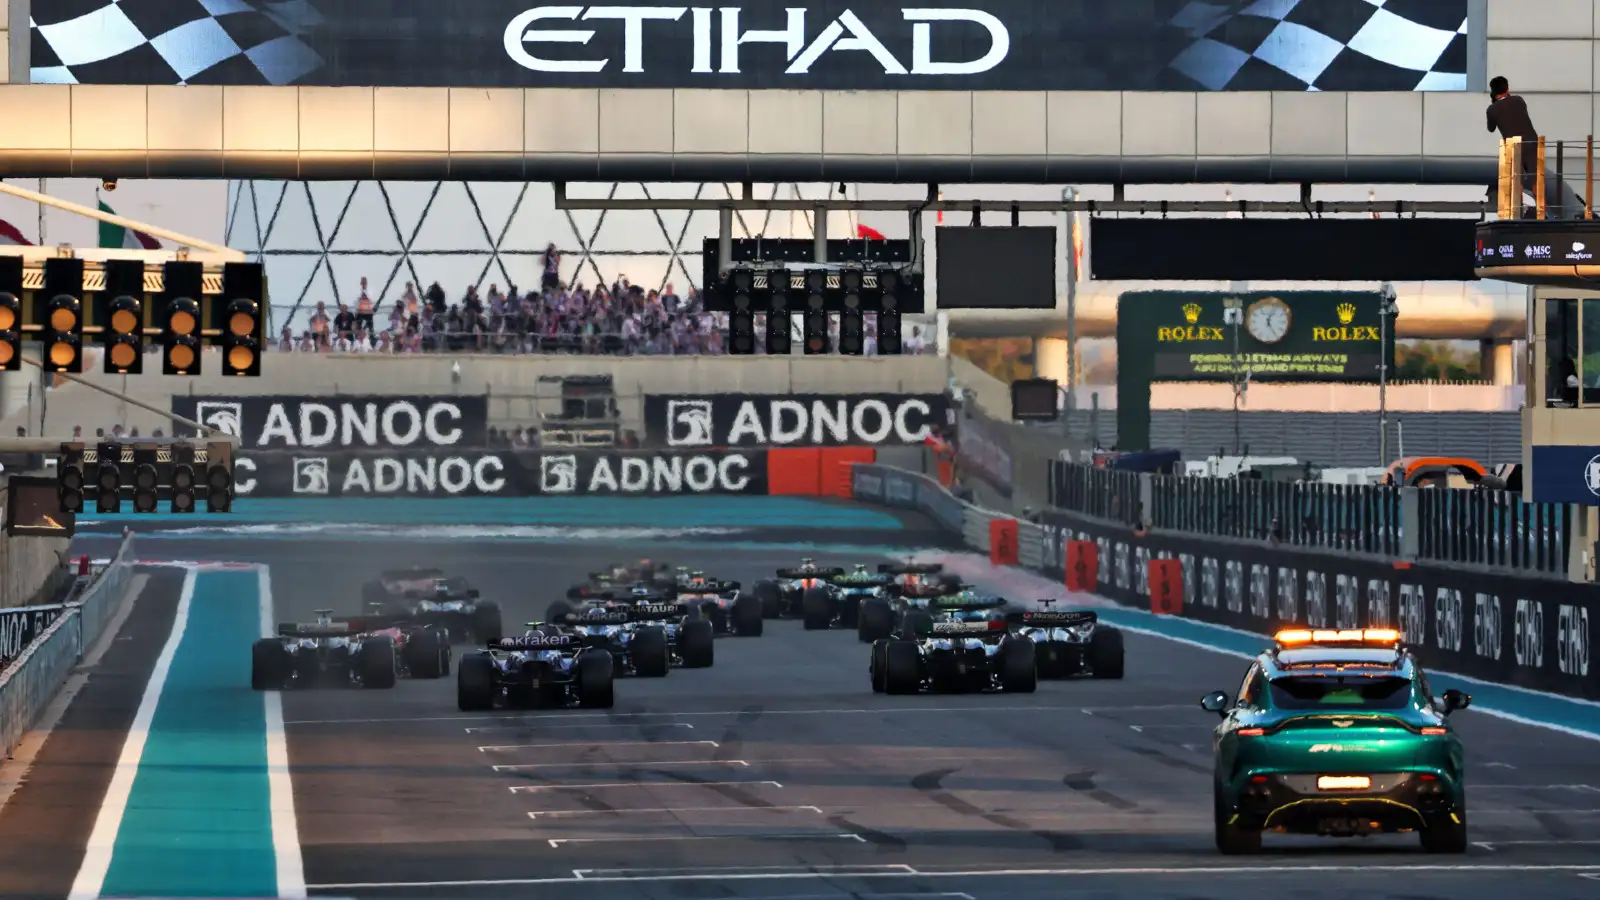 The F1 cars race into Turn 1 at the 2023 Abu Dhabi Grand Prix.